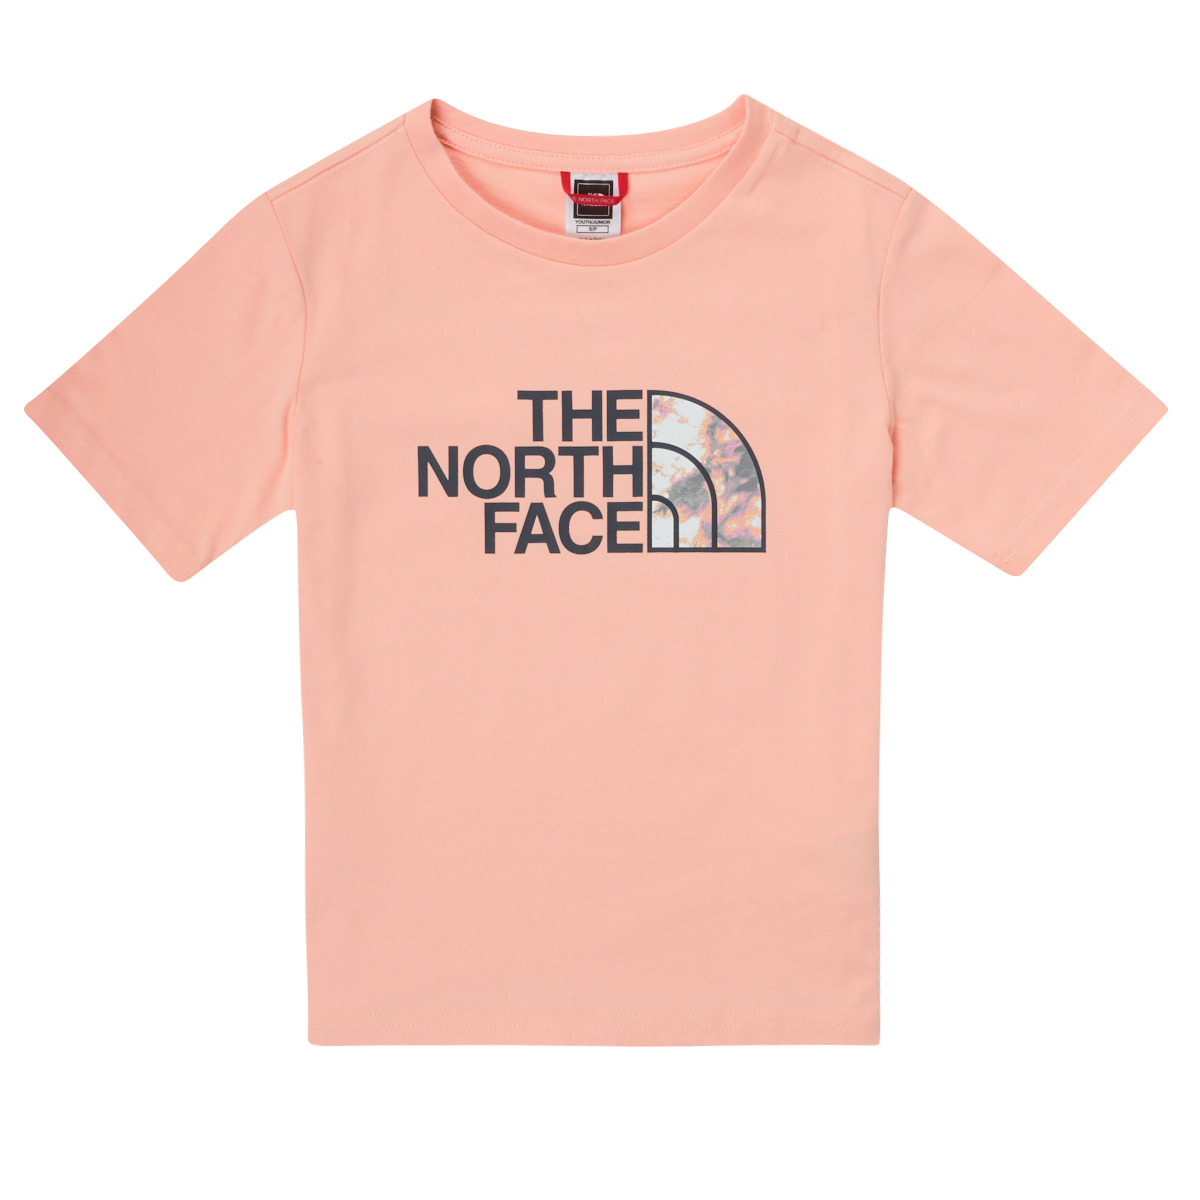 Vêtements Fille vetements fashion is my profession print t shirt item EASY RELAXED TEE Rose